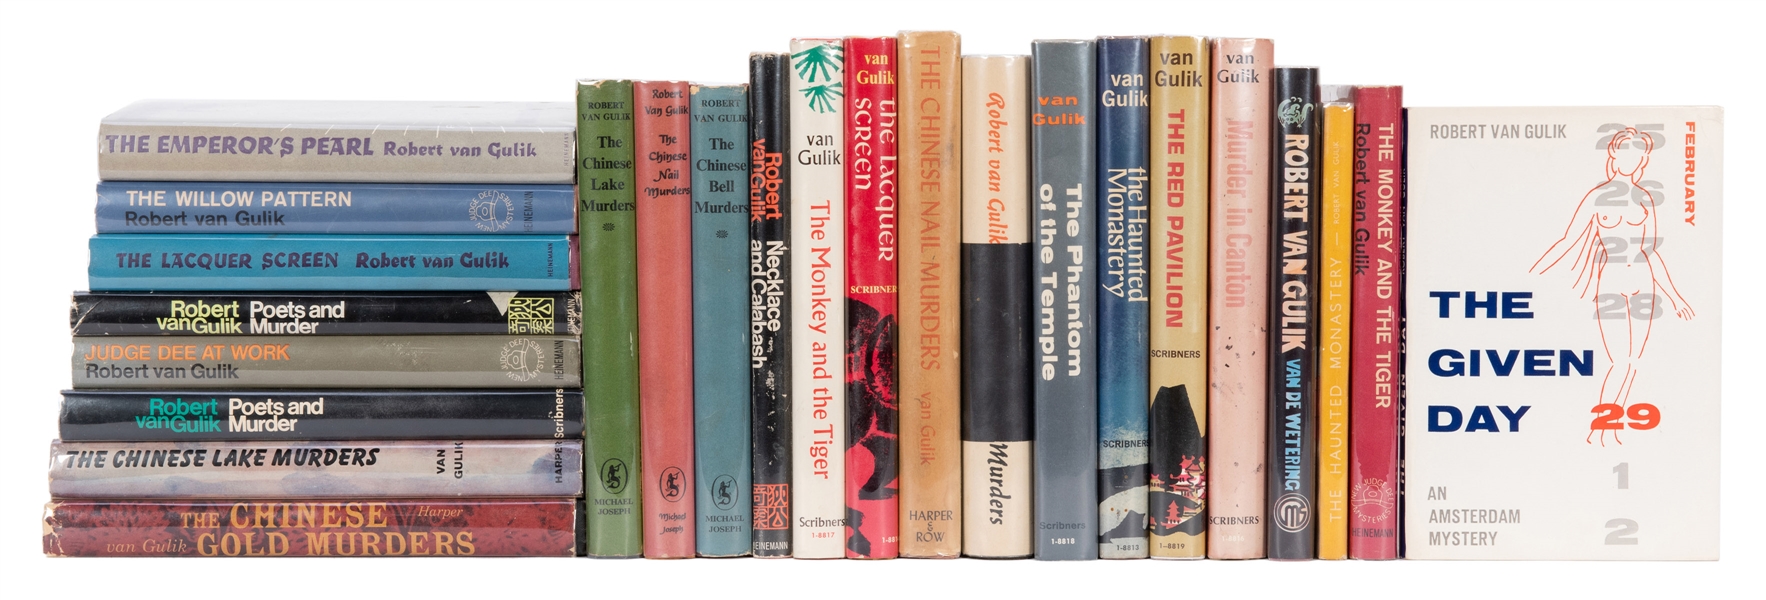 24 Volumes of Robert van Gulik Chinese Detective Stories or Judge Dee Mysteries, many UK first editions.